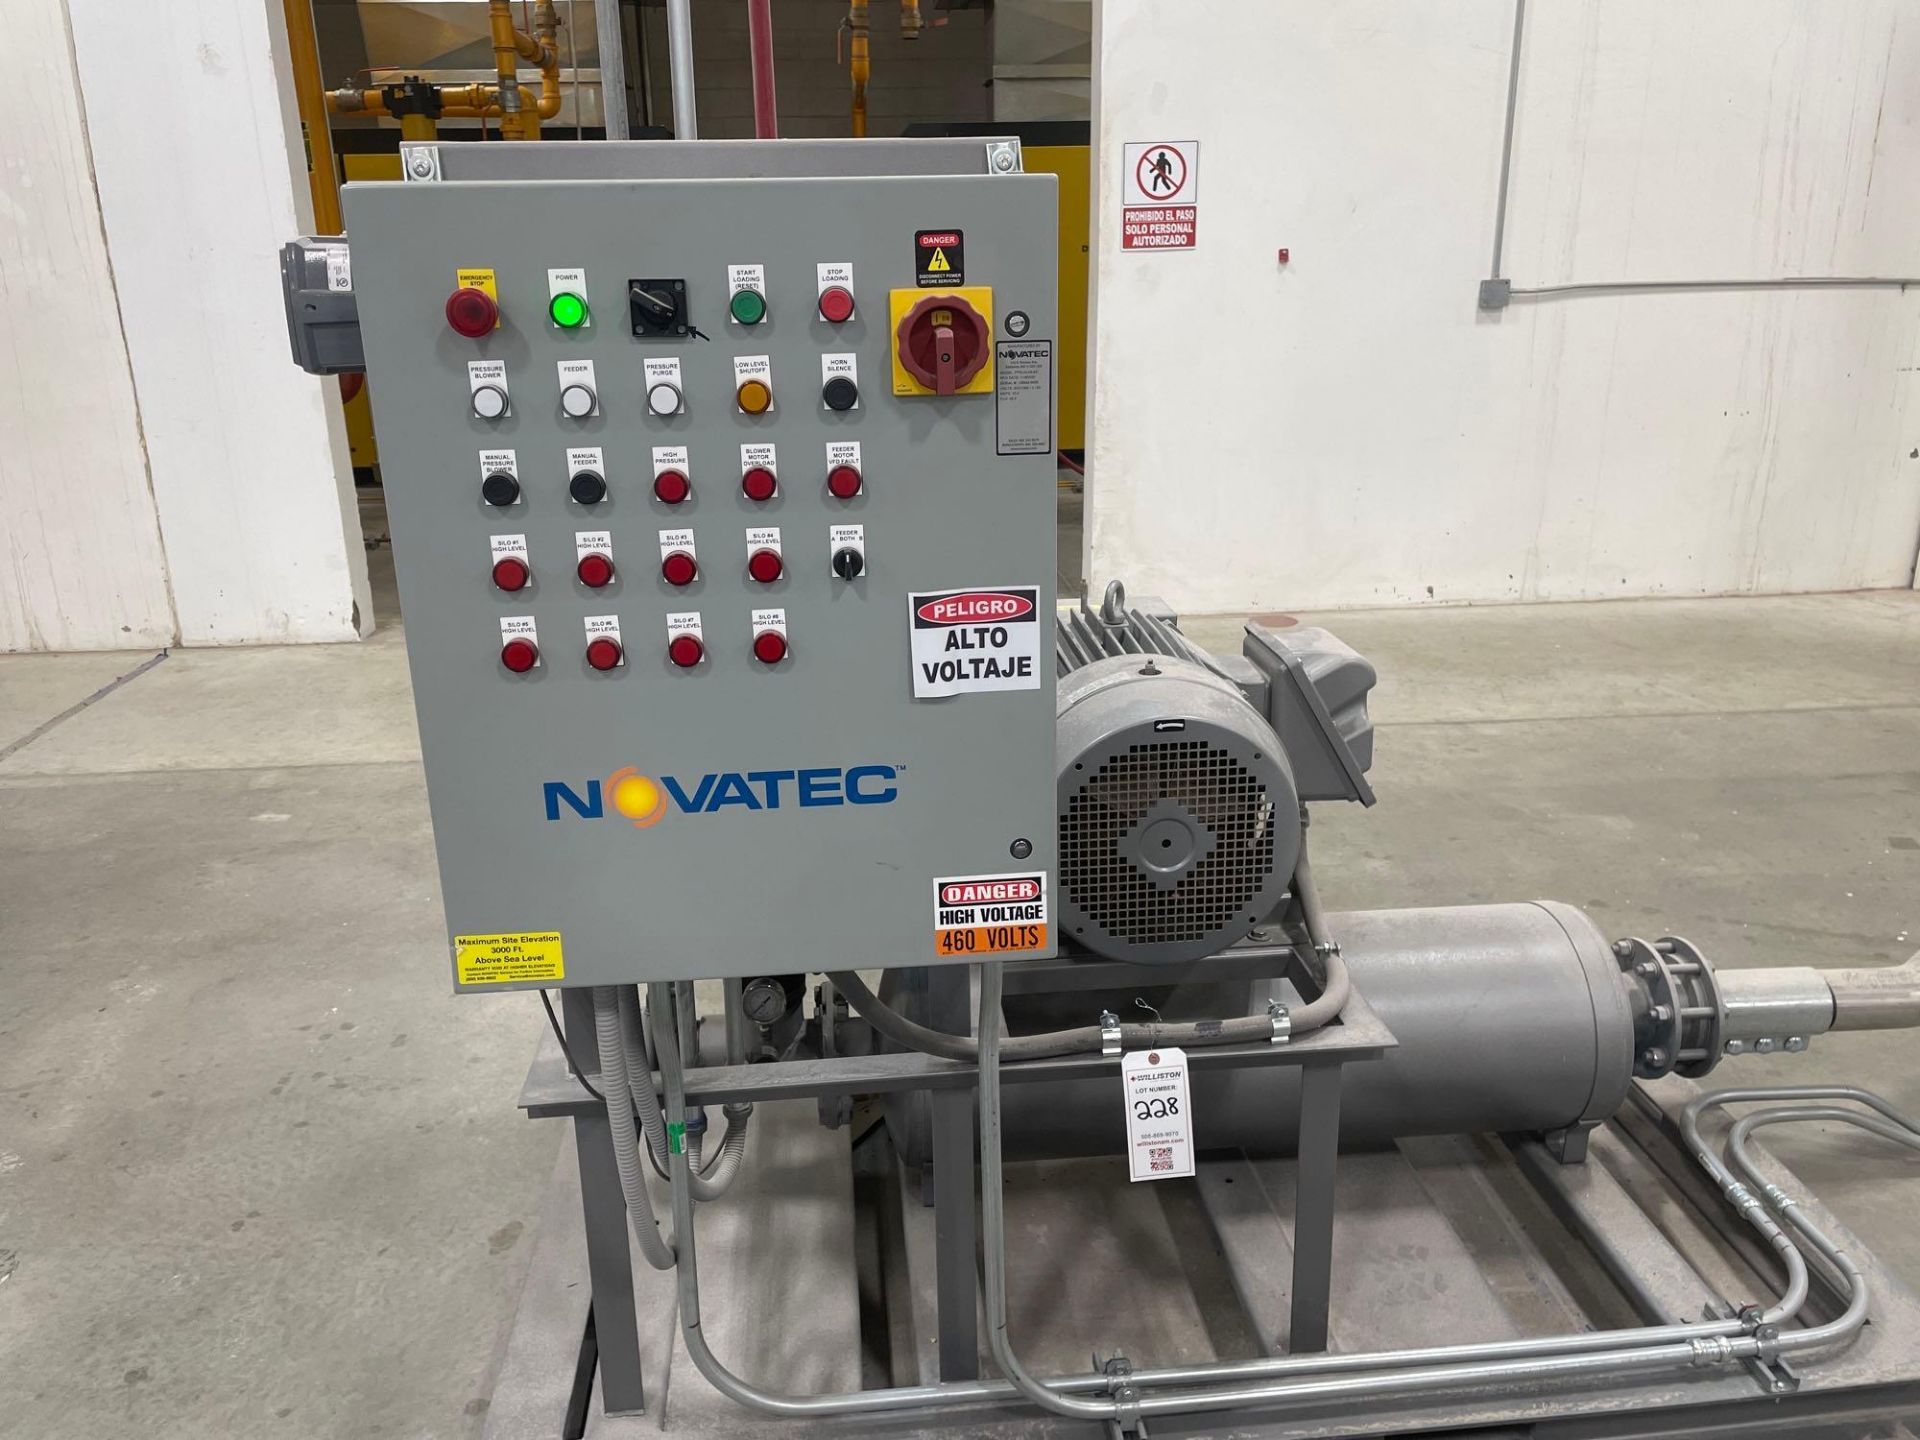 Novatec Pump System with Heat Exchanger (2021)